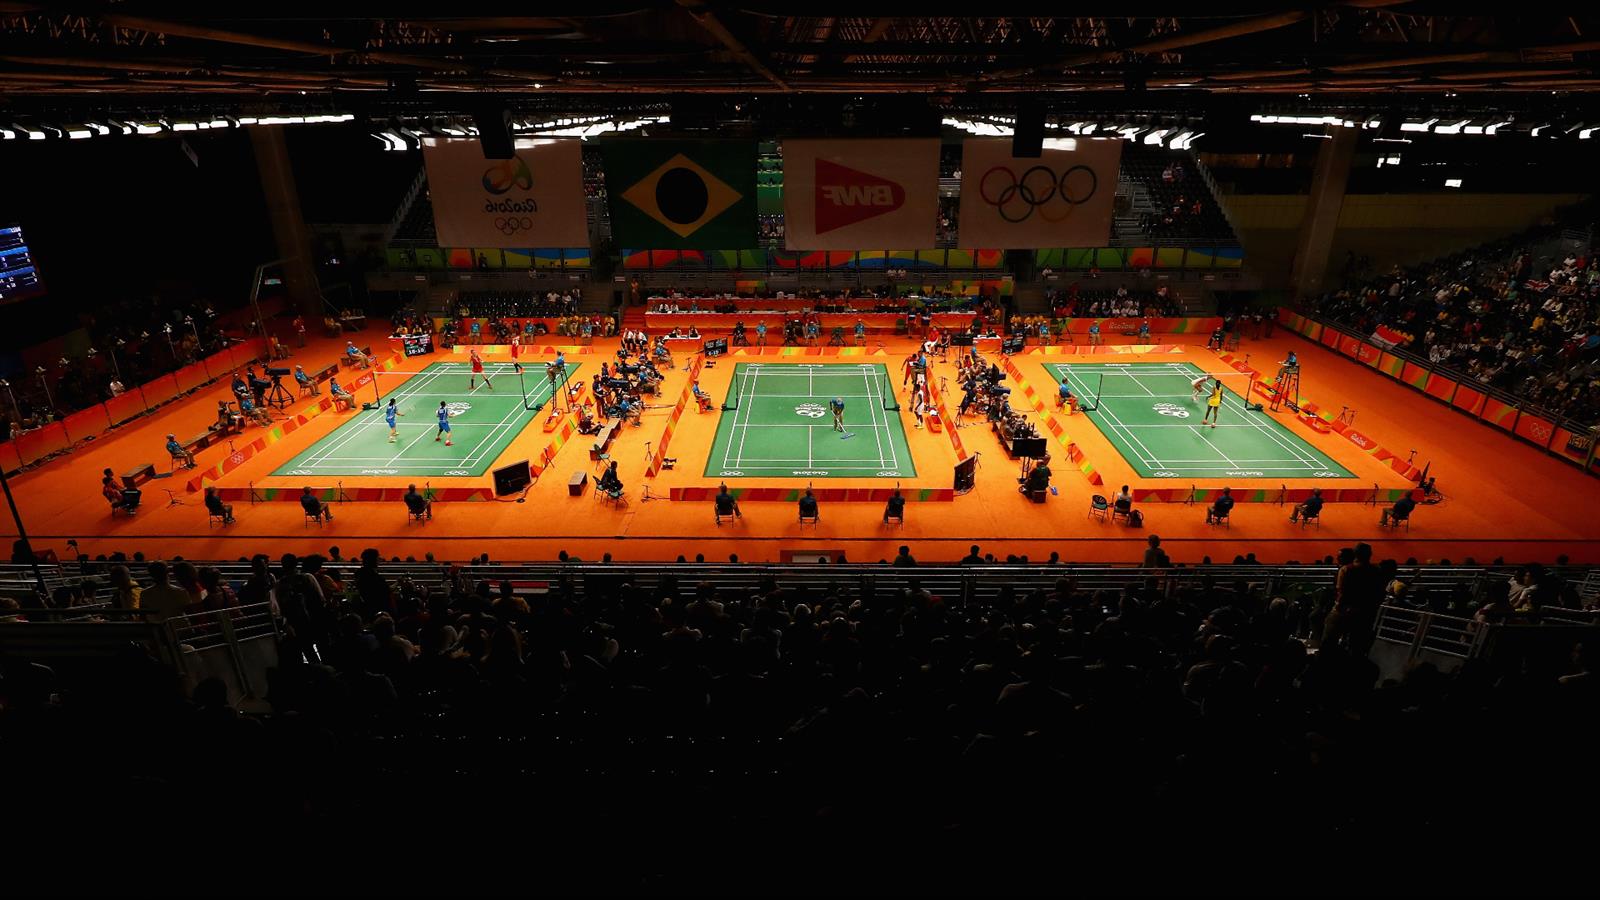 A great view of Riocentro - Pavillion 4 at the first day of competitions. Photo Credit - Getty Images/Dean Mouhtaropoulos